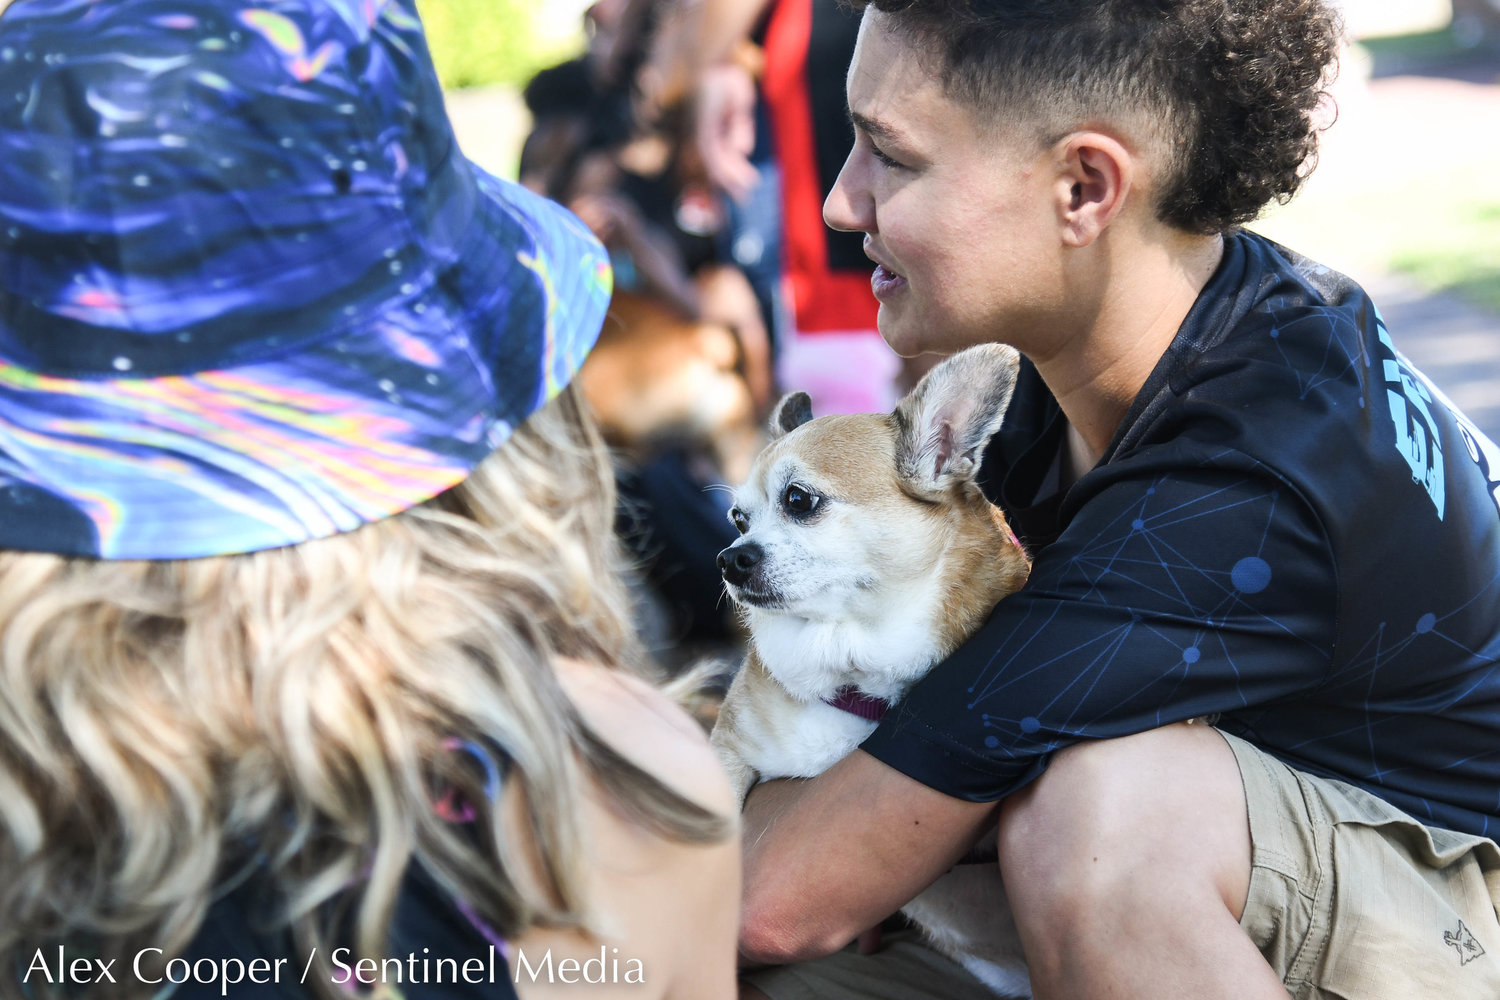 Jennifer Lavine holds her dog Koutavi during a dog show hosted by the Herkimer County Humane Society on Saturday at Central Plaza in Ilion. The show was part of a long list of events hosted during Ilion Days 2022 from July 16-24.